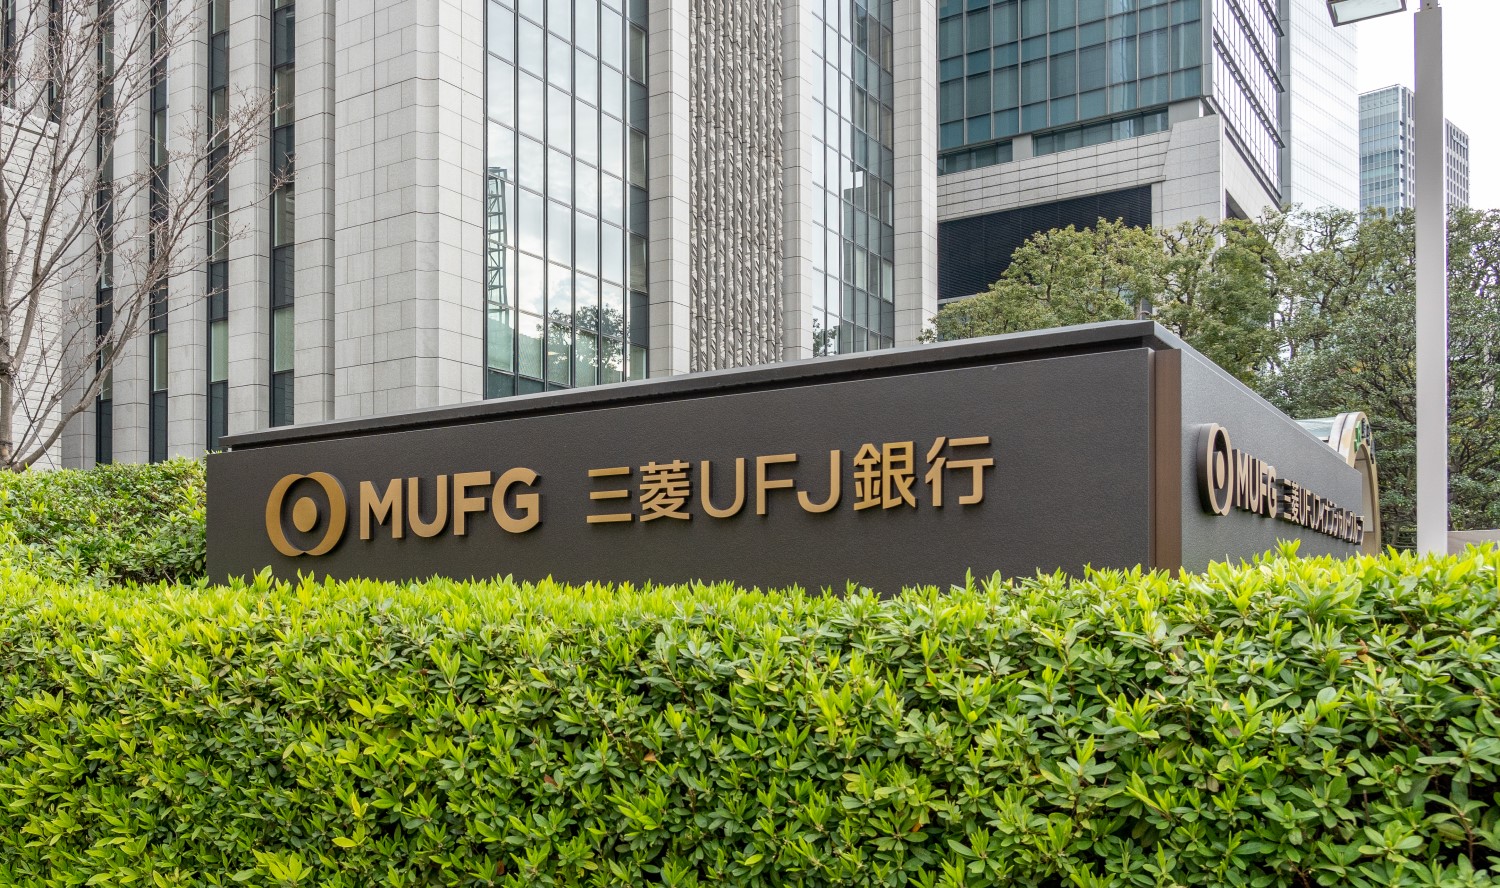 MUFG Plays Down Reports Of Digital Currency Launch